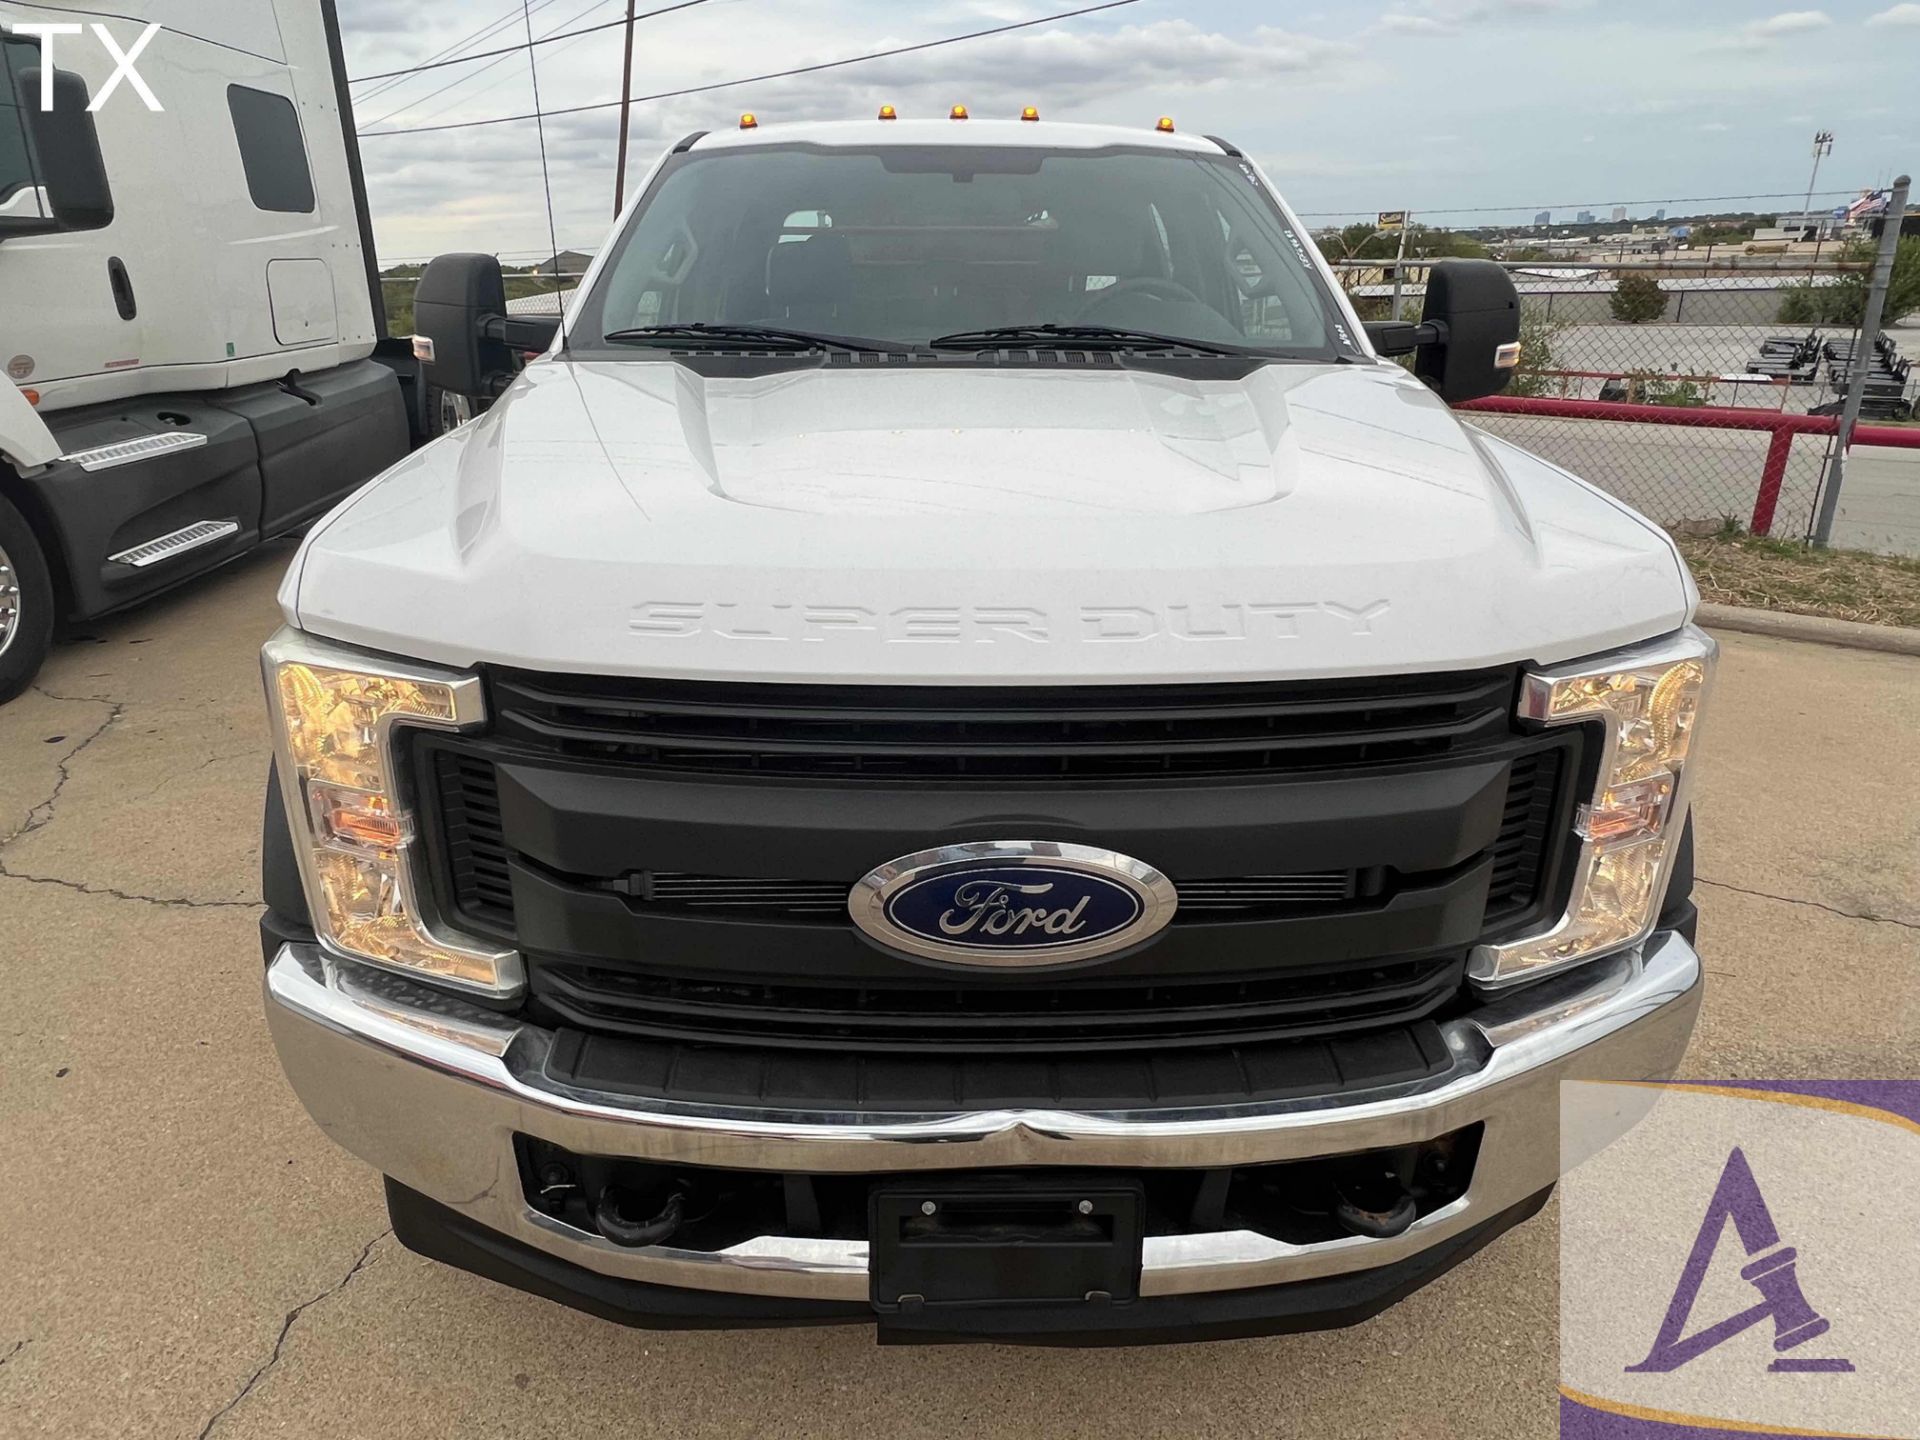 2019 Ford F550 4x4 Crew Cab Fuel Truck, Ingersoll-Rand Air Compressor, Toolboxes! - Image 4 of 20